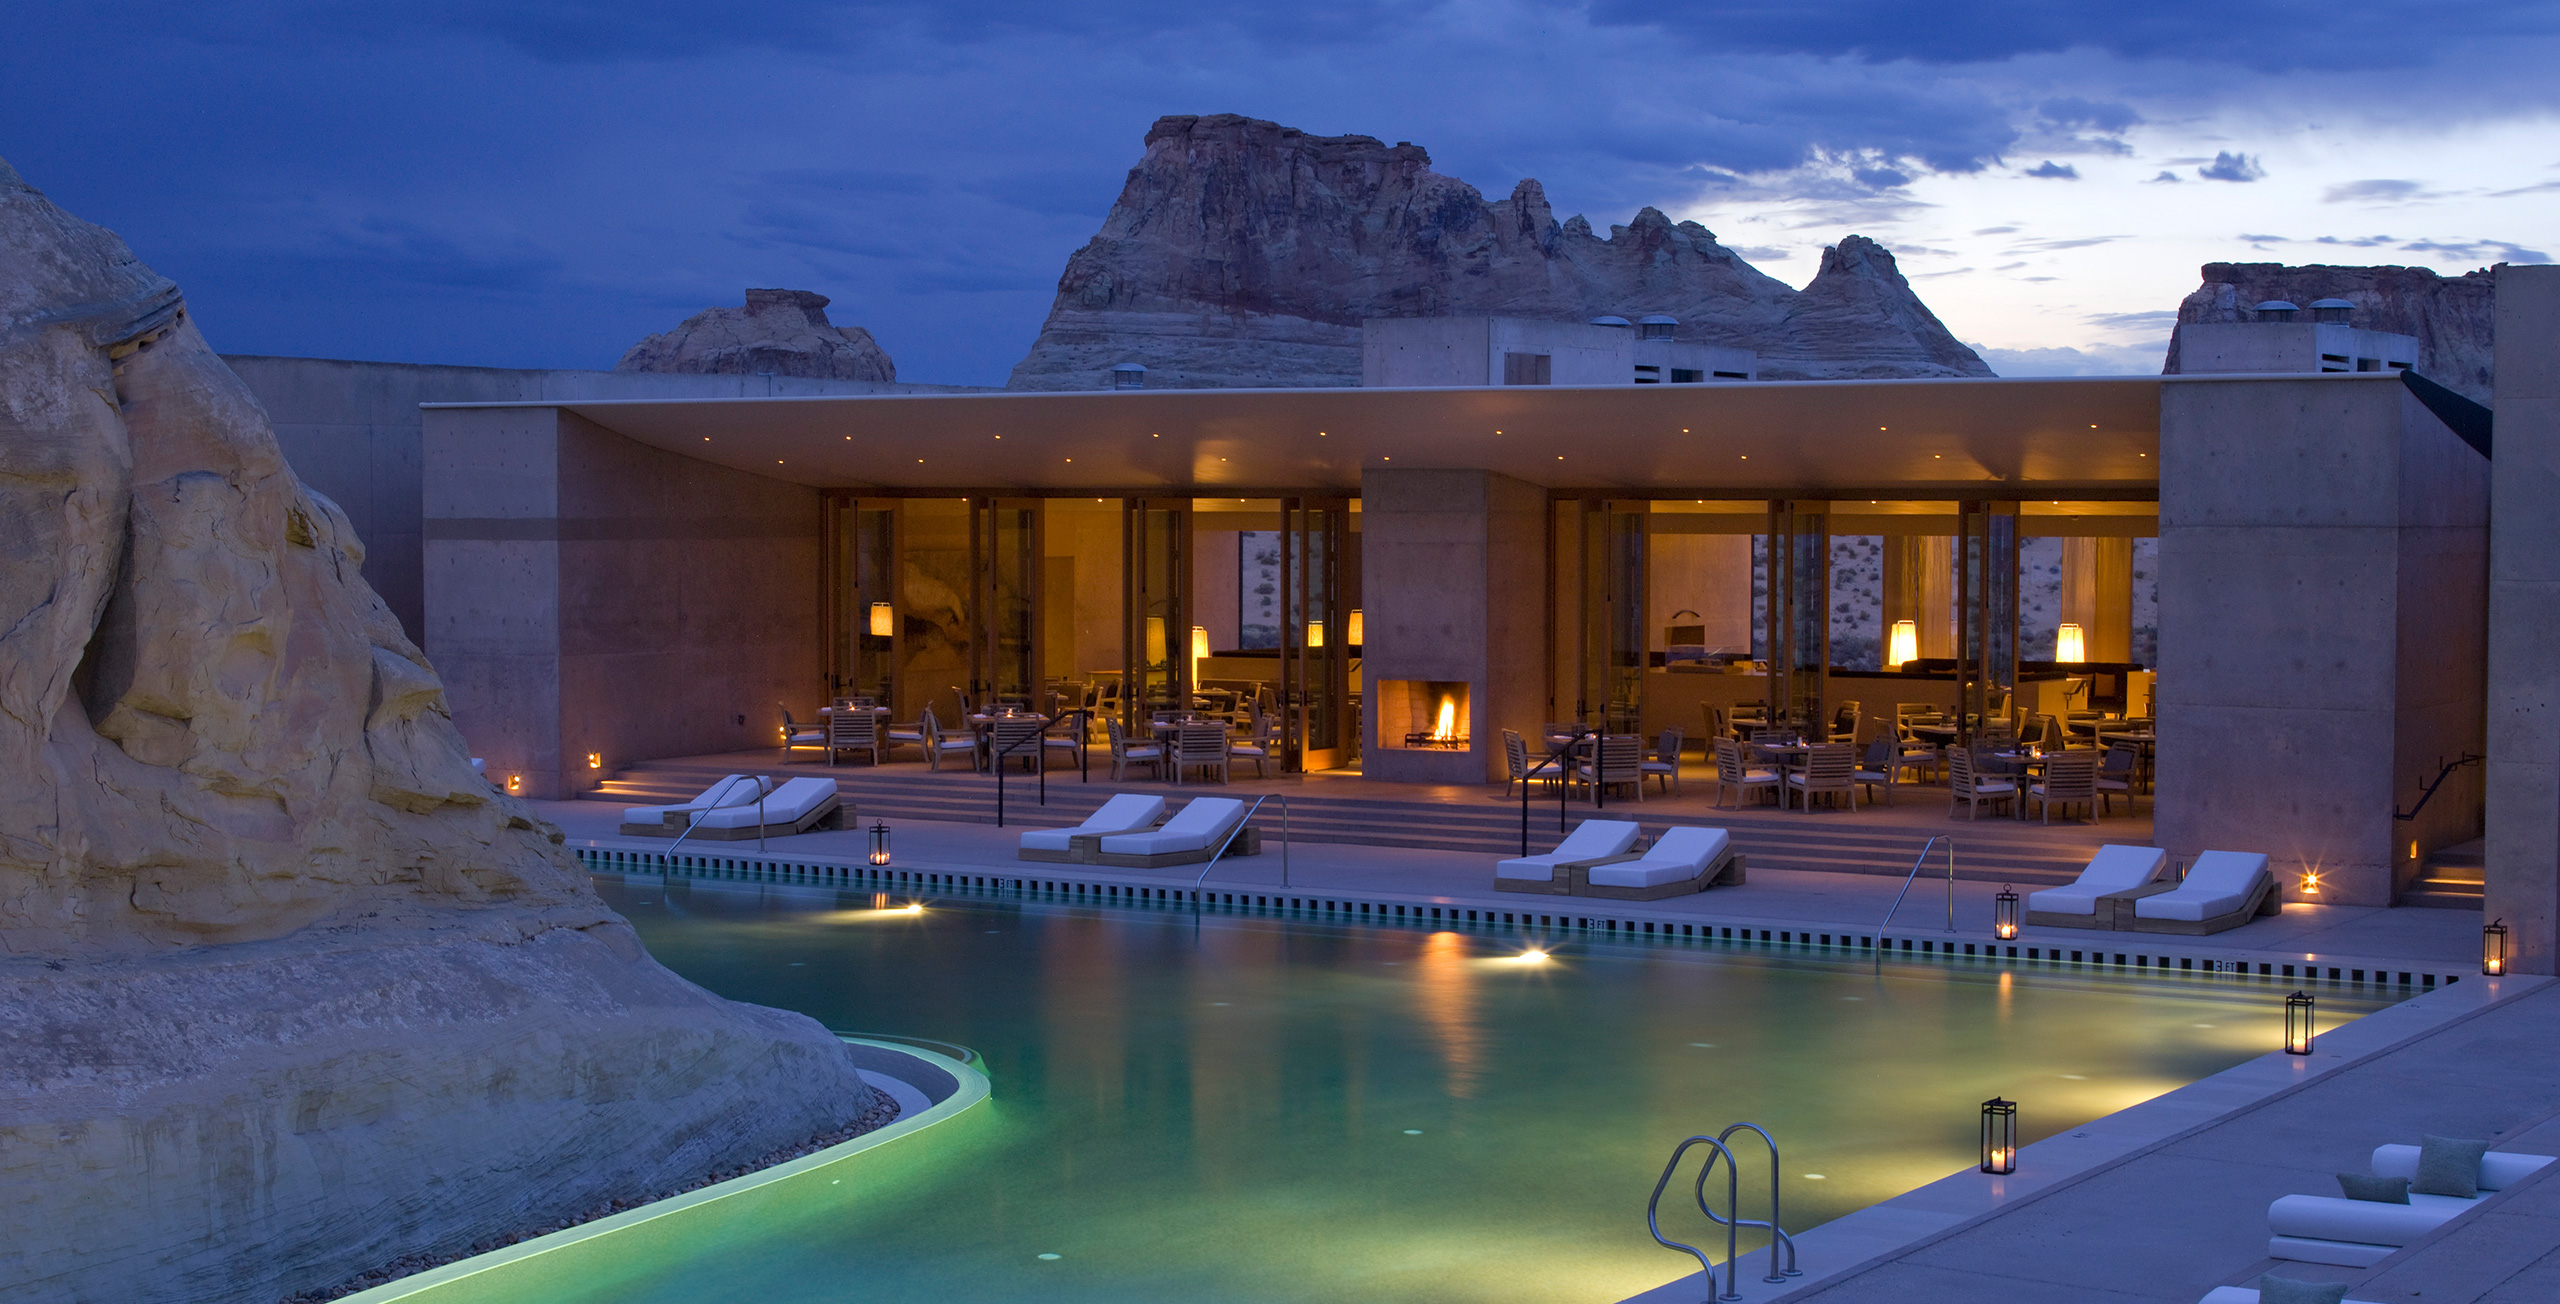 <span>The resort was designed to blend in seamlessly with its desert surroundings</span>